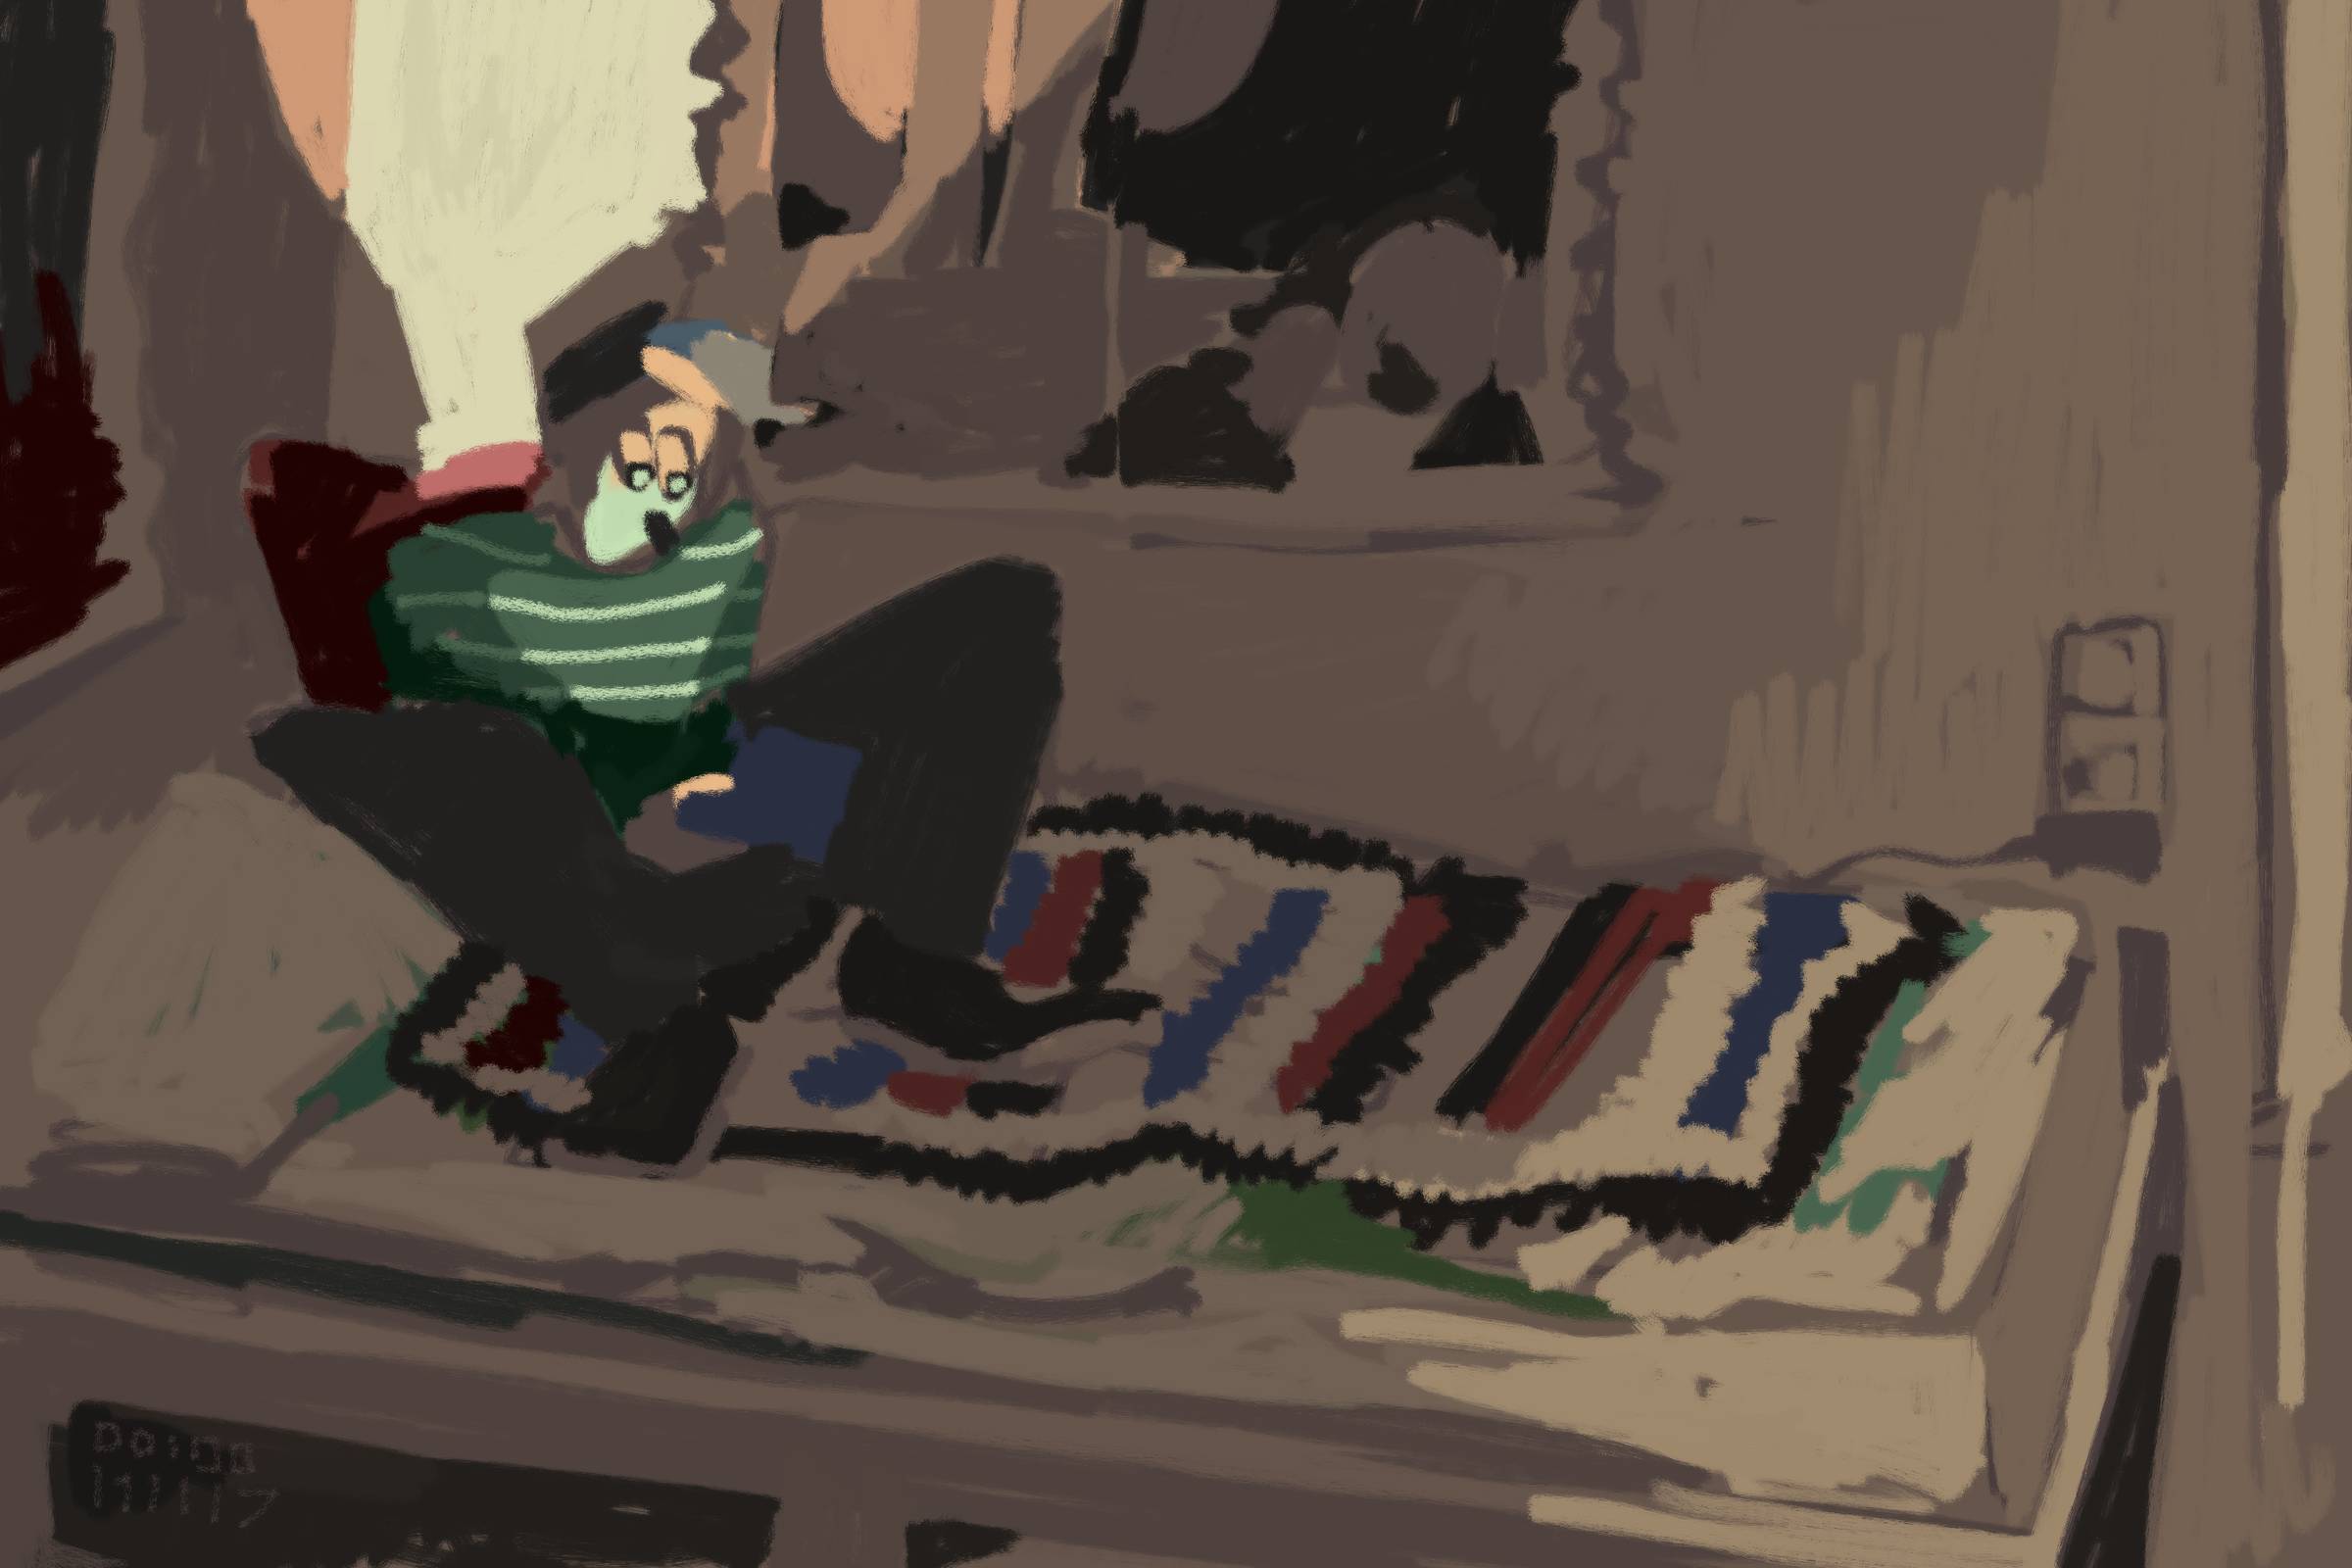 Rough painting of a person from a distance, sitting on a bed, face lit up by something (Artists note: It is a Nintendo DS)